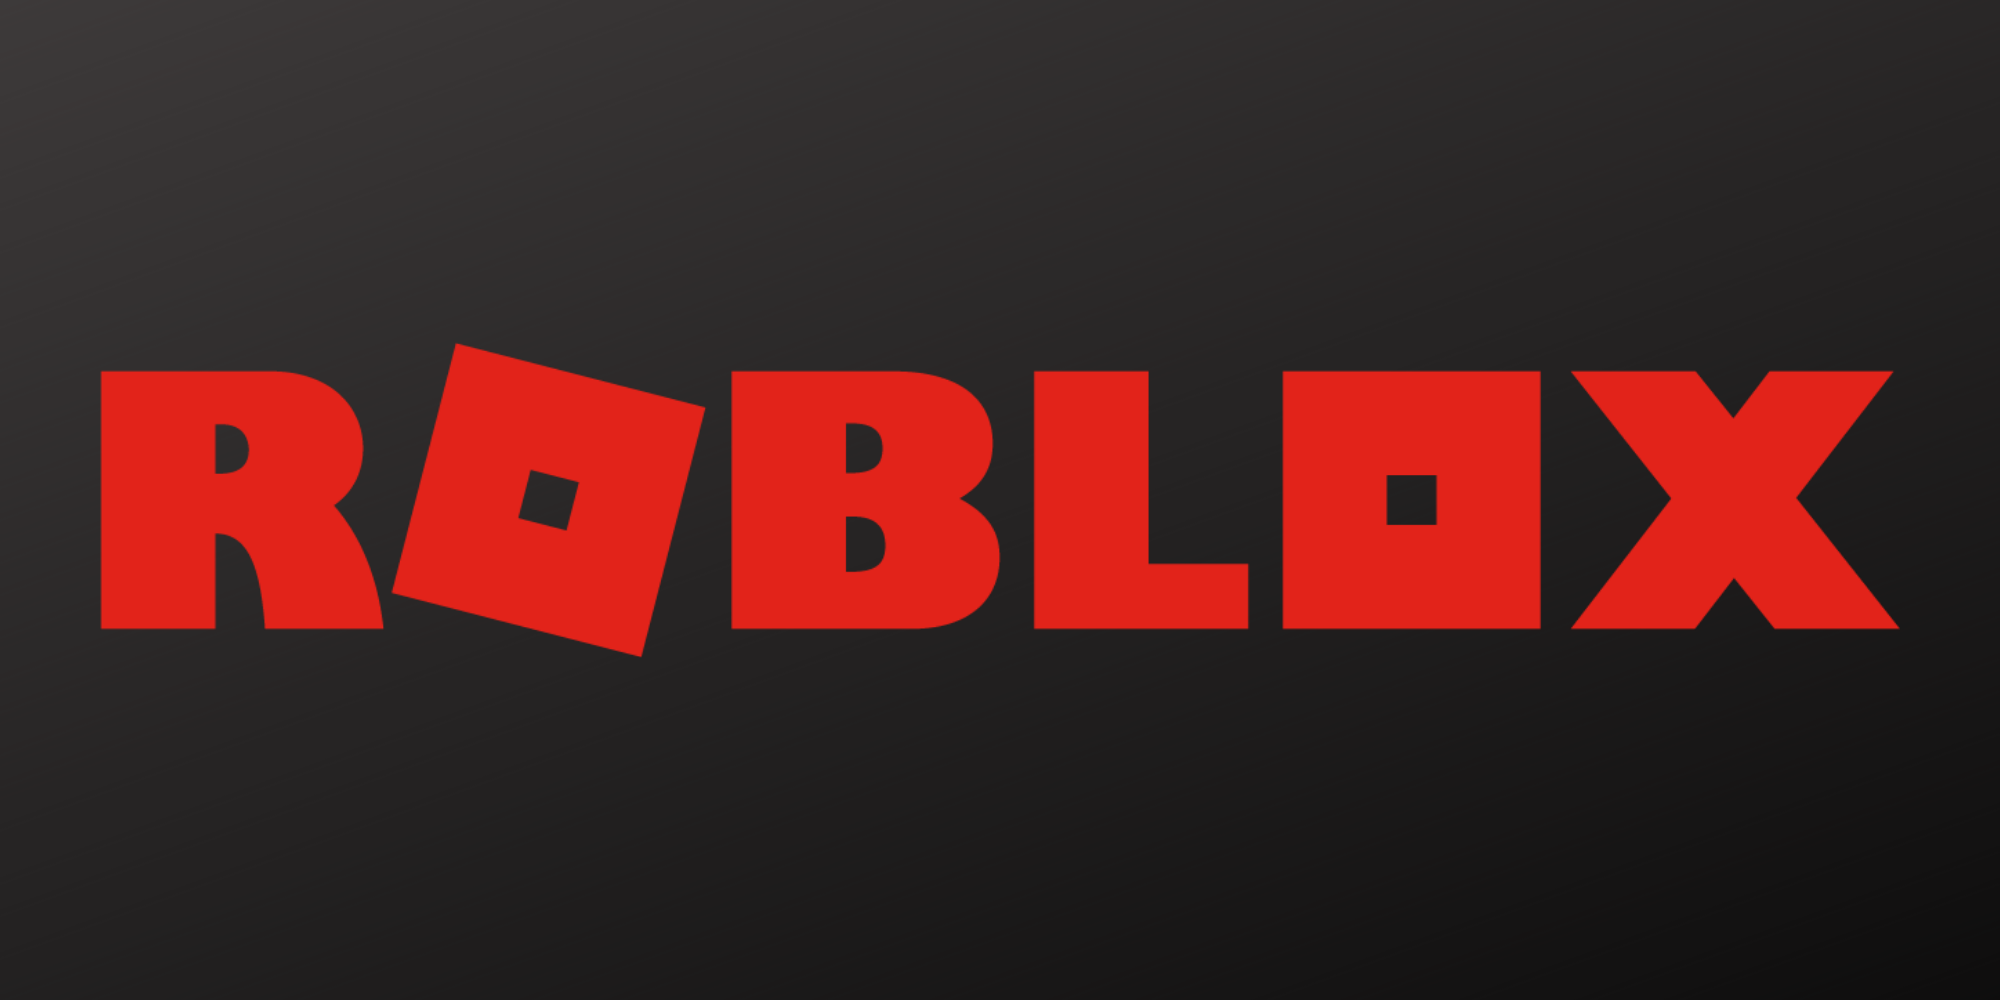 Eyeing An Entry Into China Roblox Enters Strategic Partnership With Tencent Digital Media Wire - eyeing an entry into china roblox enters strategic partnership